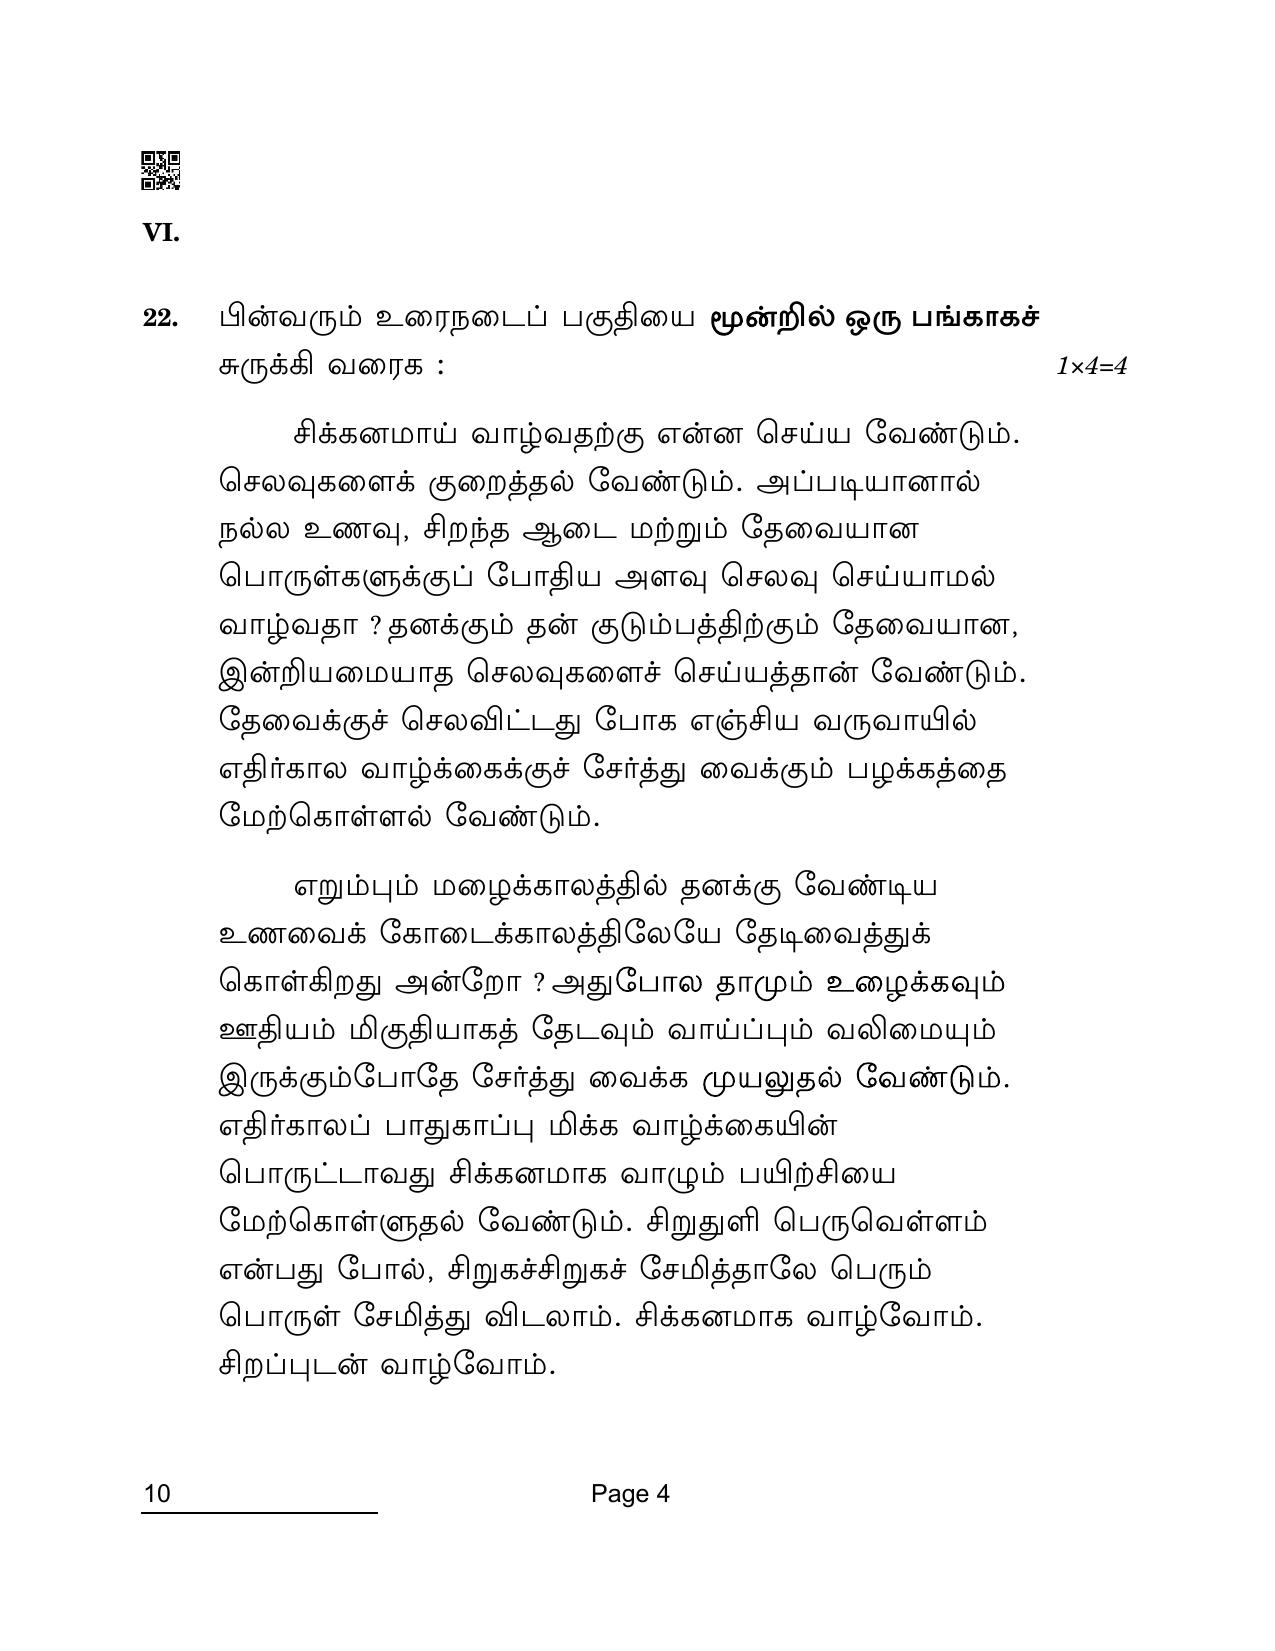 CBSE Class 10 10 Tamil 2022 Compartment Question Paper - Page 4